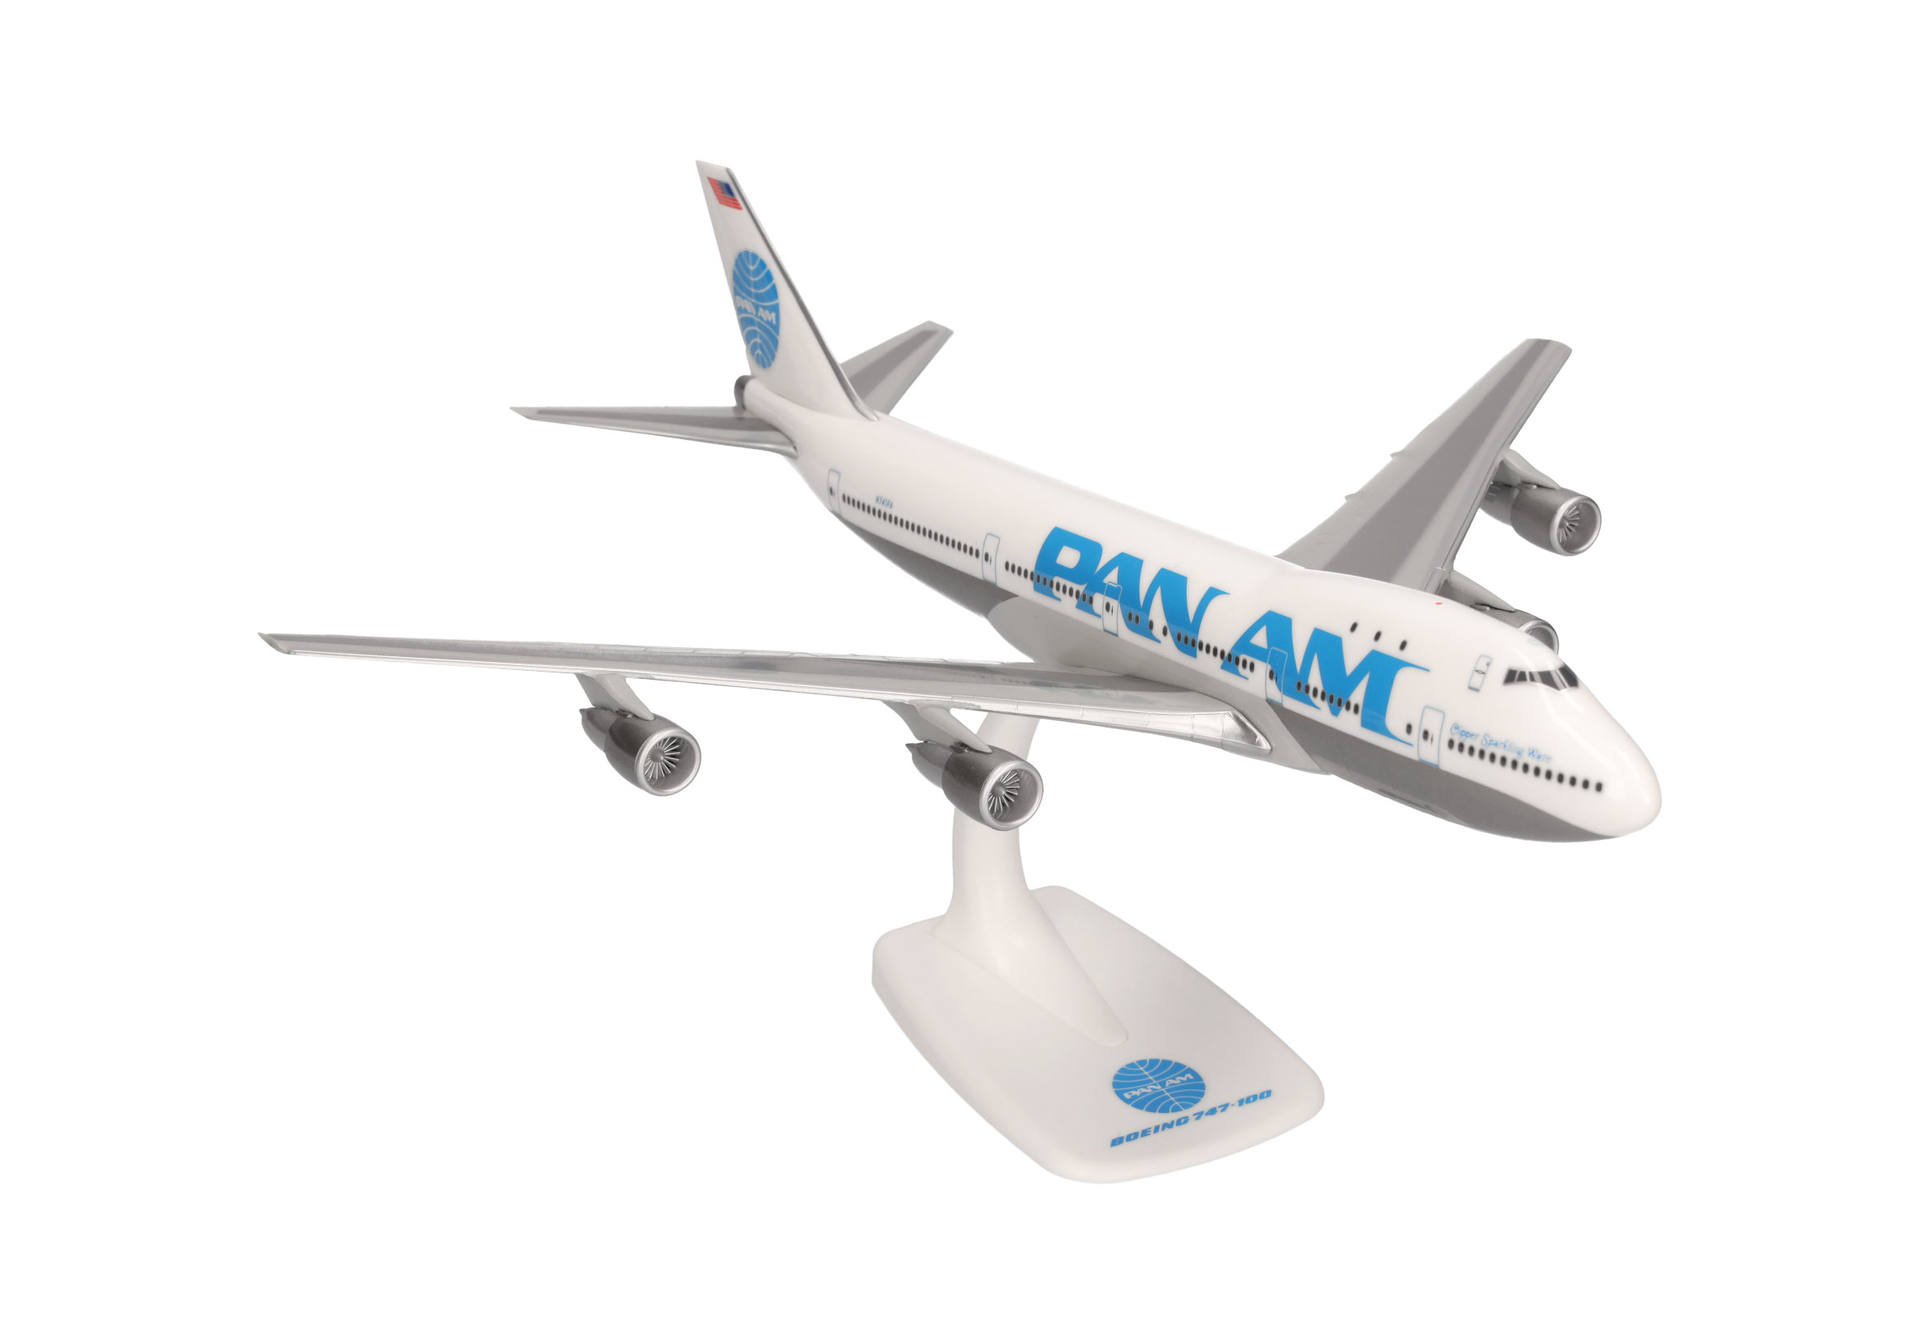 Pan Am Boeing 747-100 (billboard livery) – N741PA "Clipper Sparkling Wave"